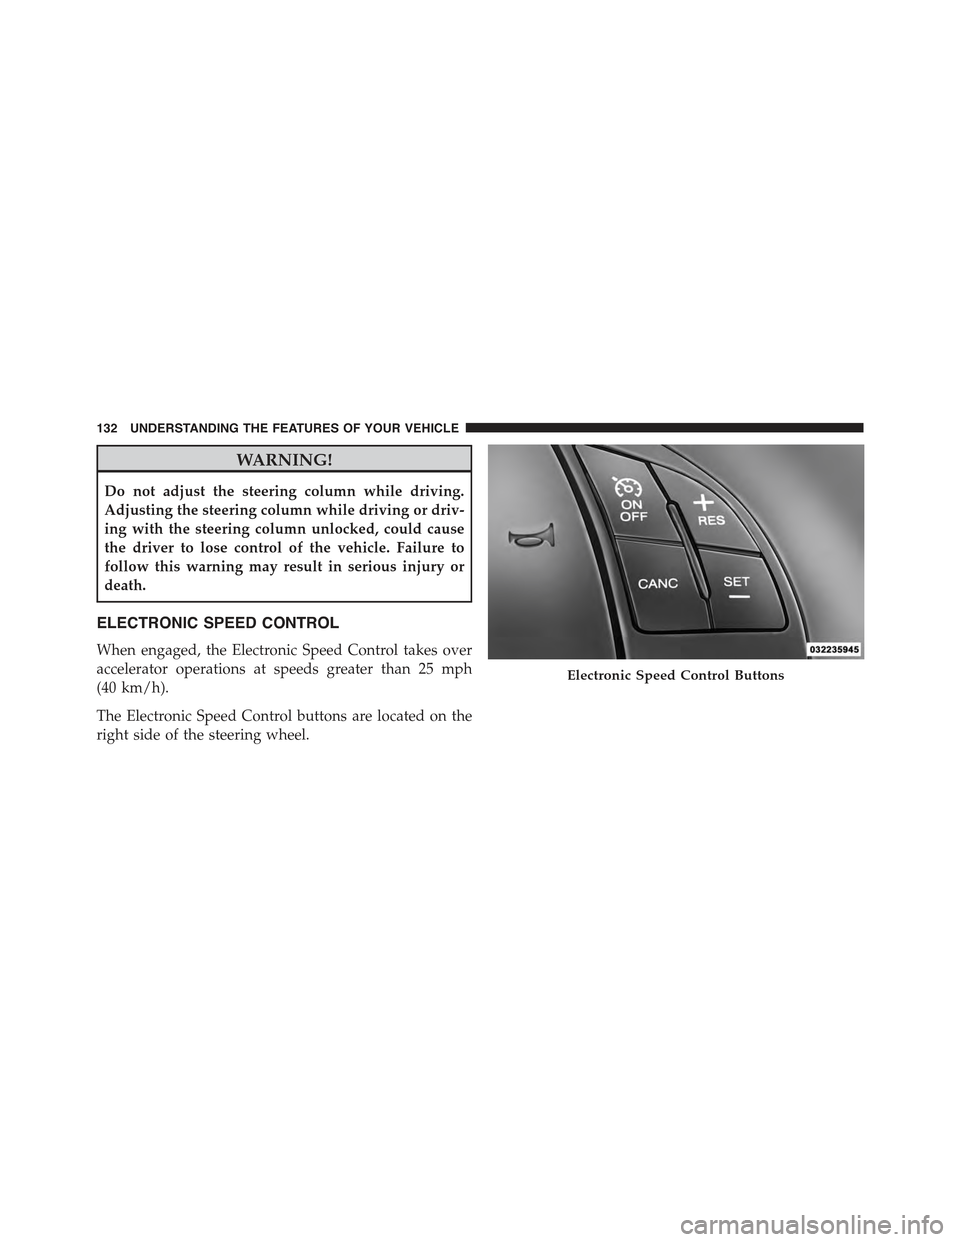 FIAT 500E 2015 2.G User Guide WARNING!
Do not adjust the steering column while driving.
Adjusting the steering column while driving or driv-
ing with the steering column unlocked, could cause
the driver to lose control of the vehi